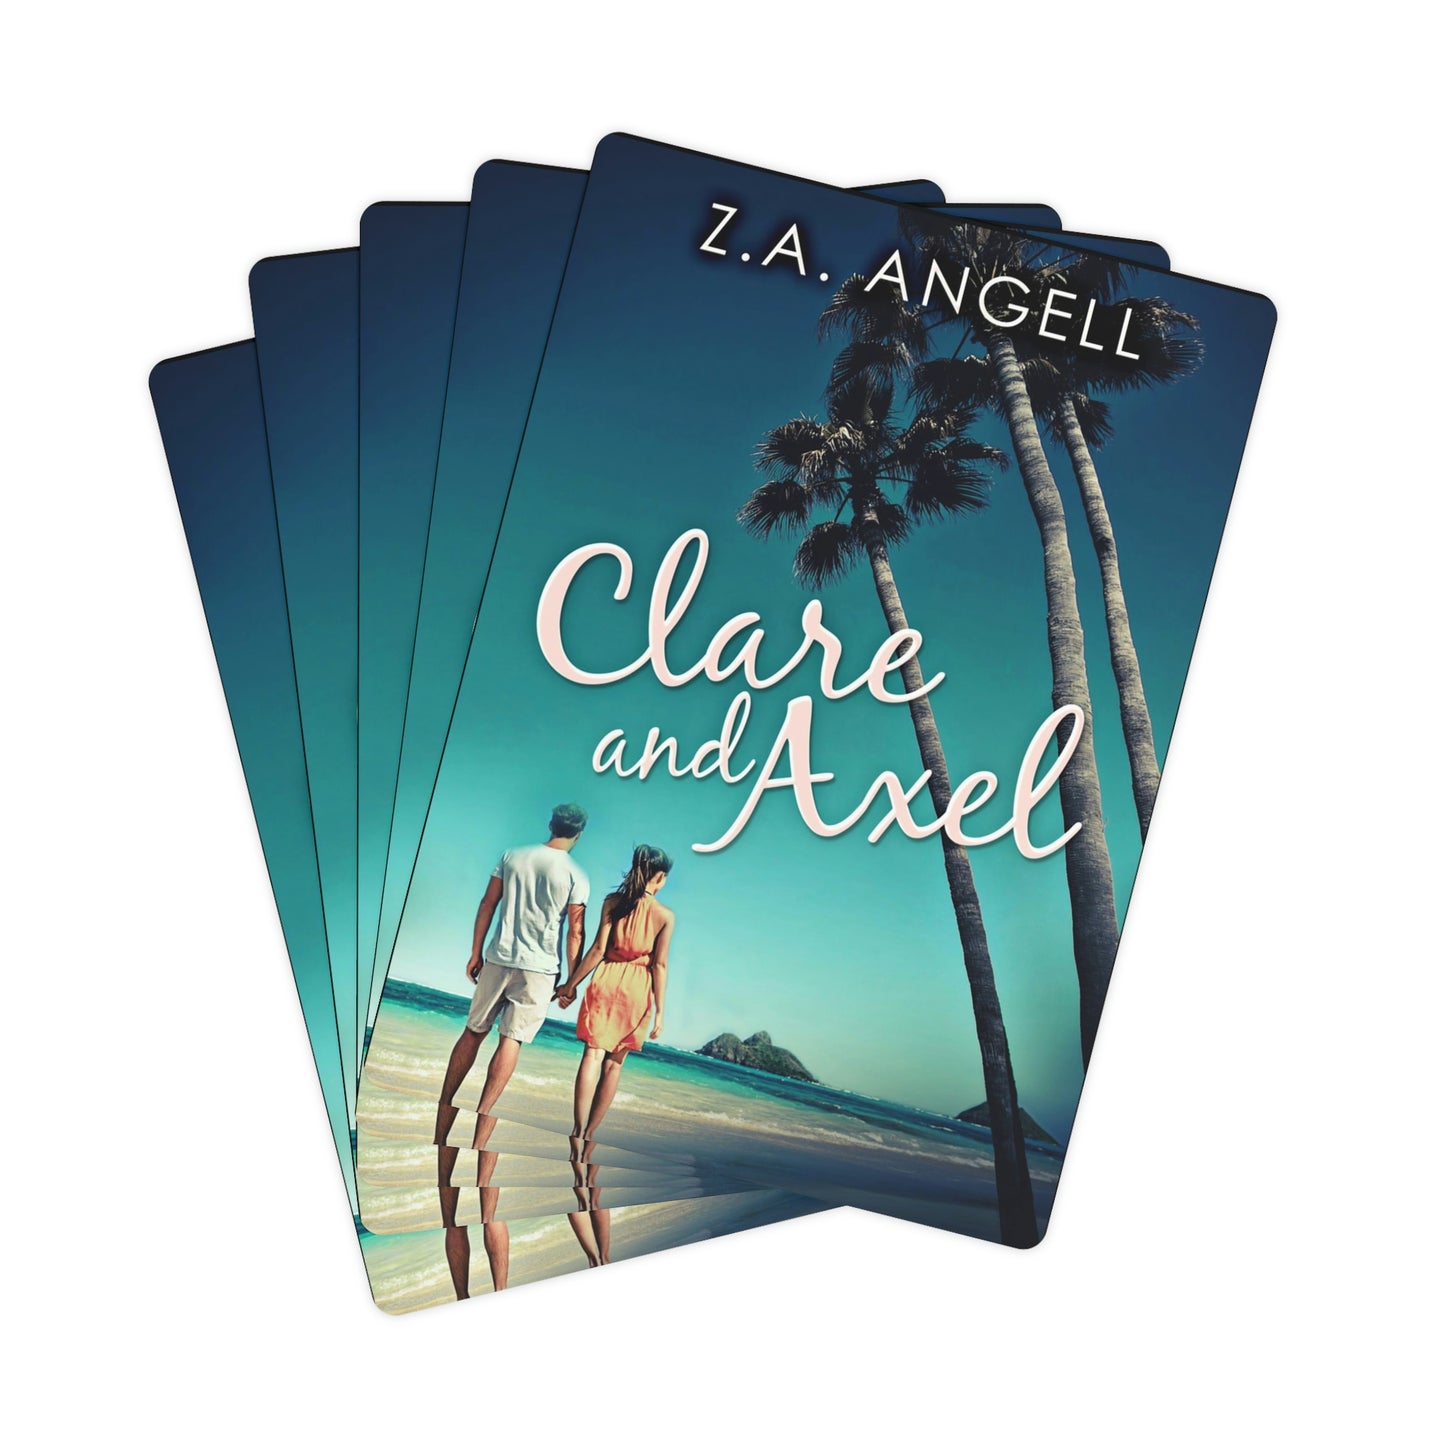 Clare and Axel - Playing Cards